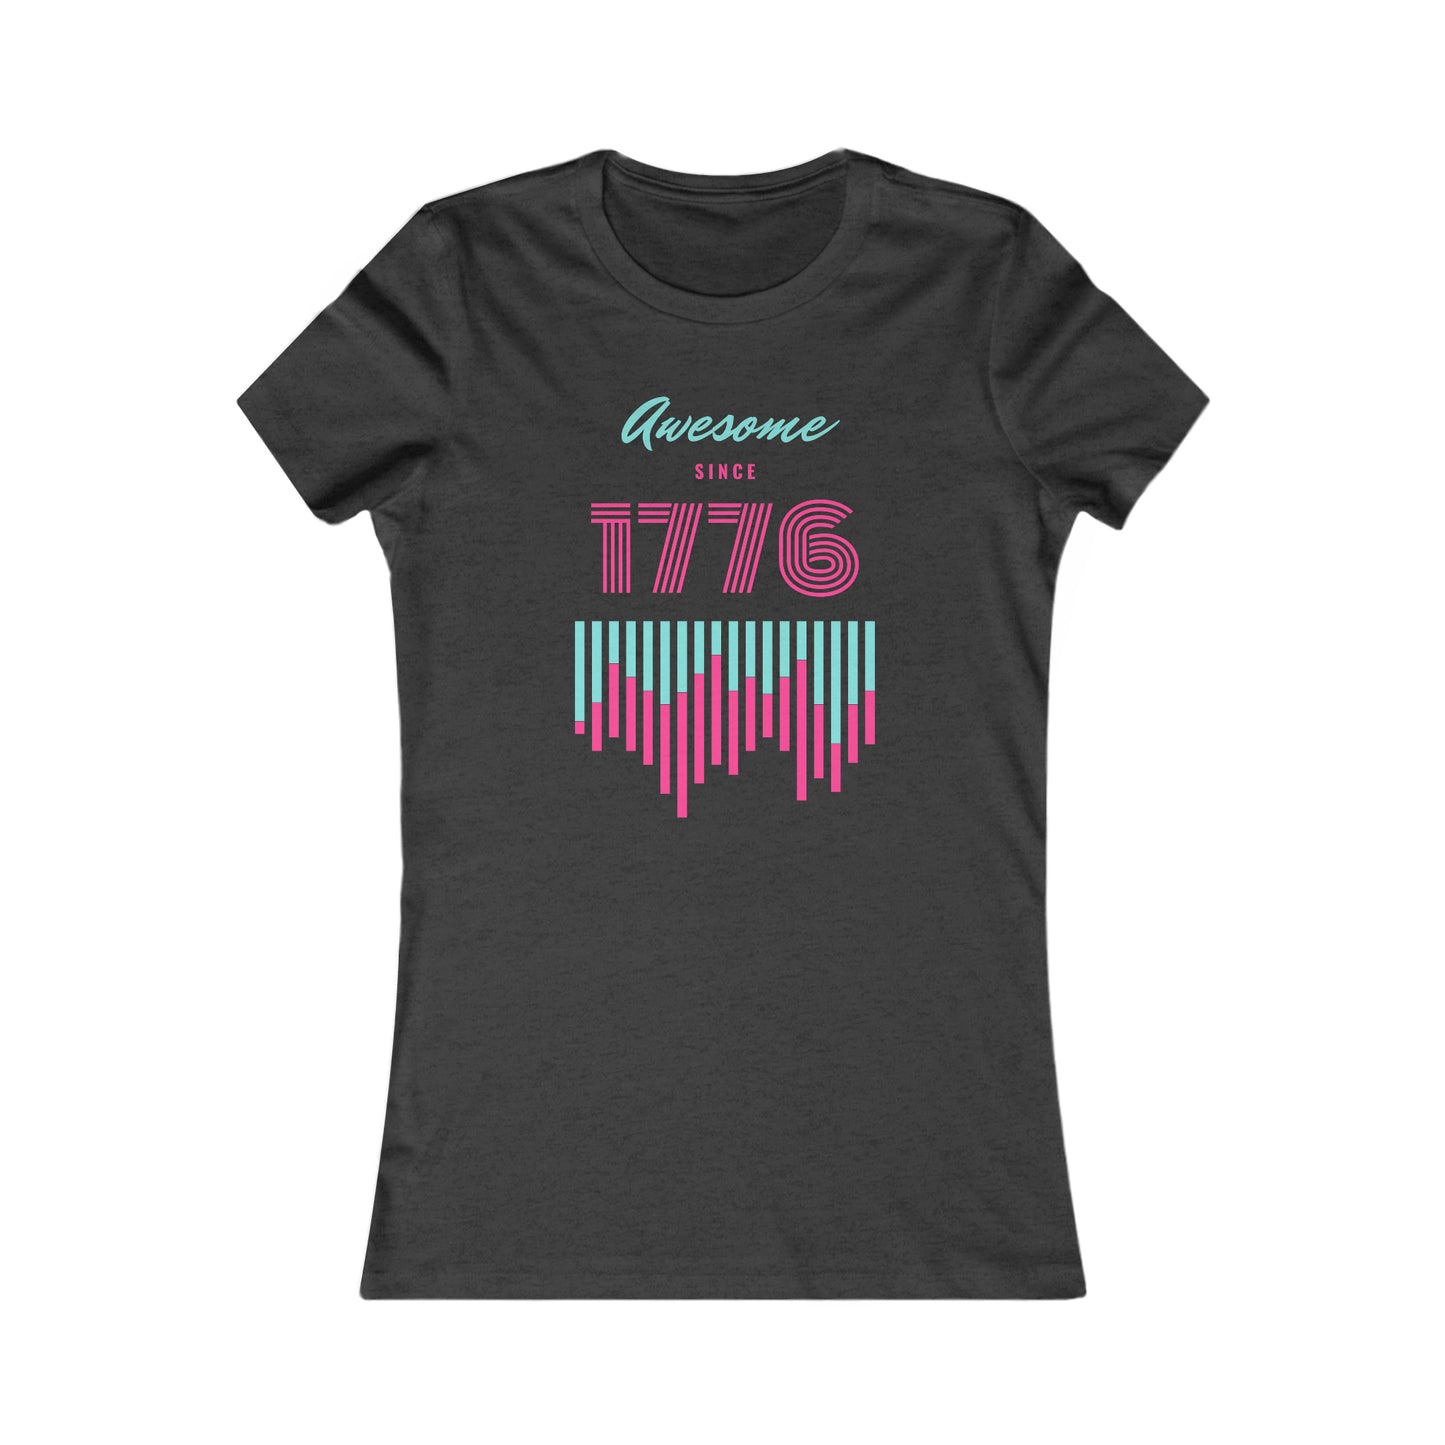 Awesome 1776 - Women's Favorite Tee